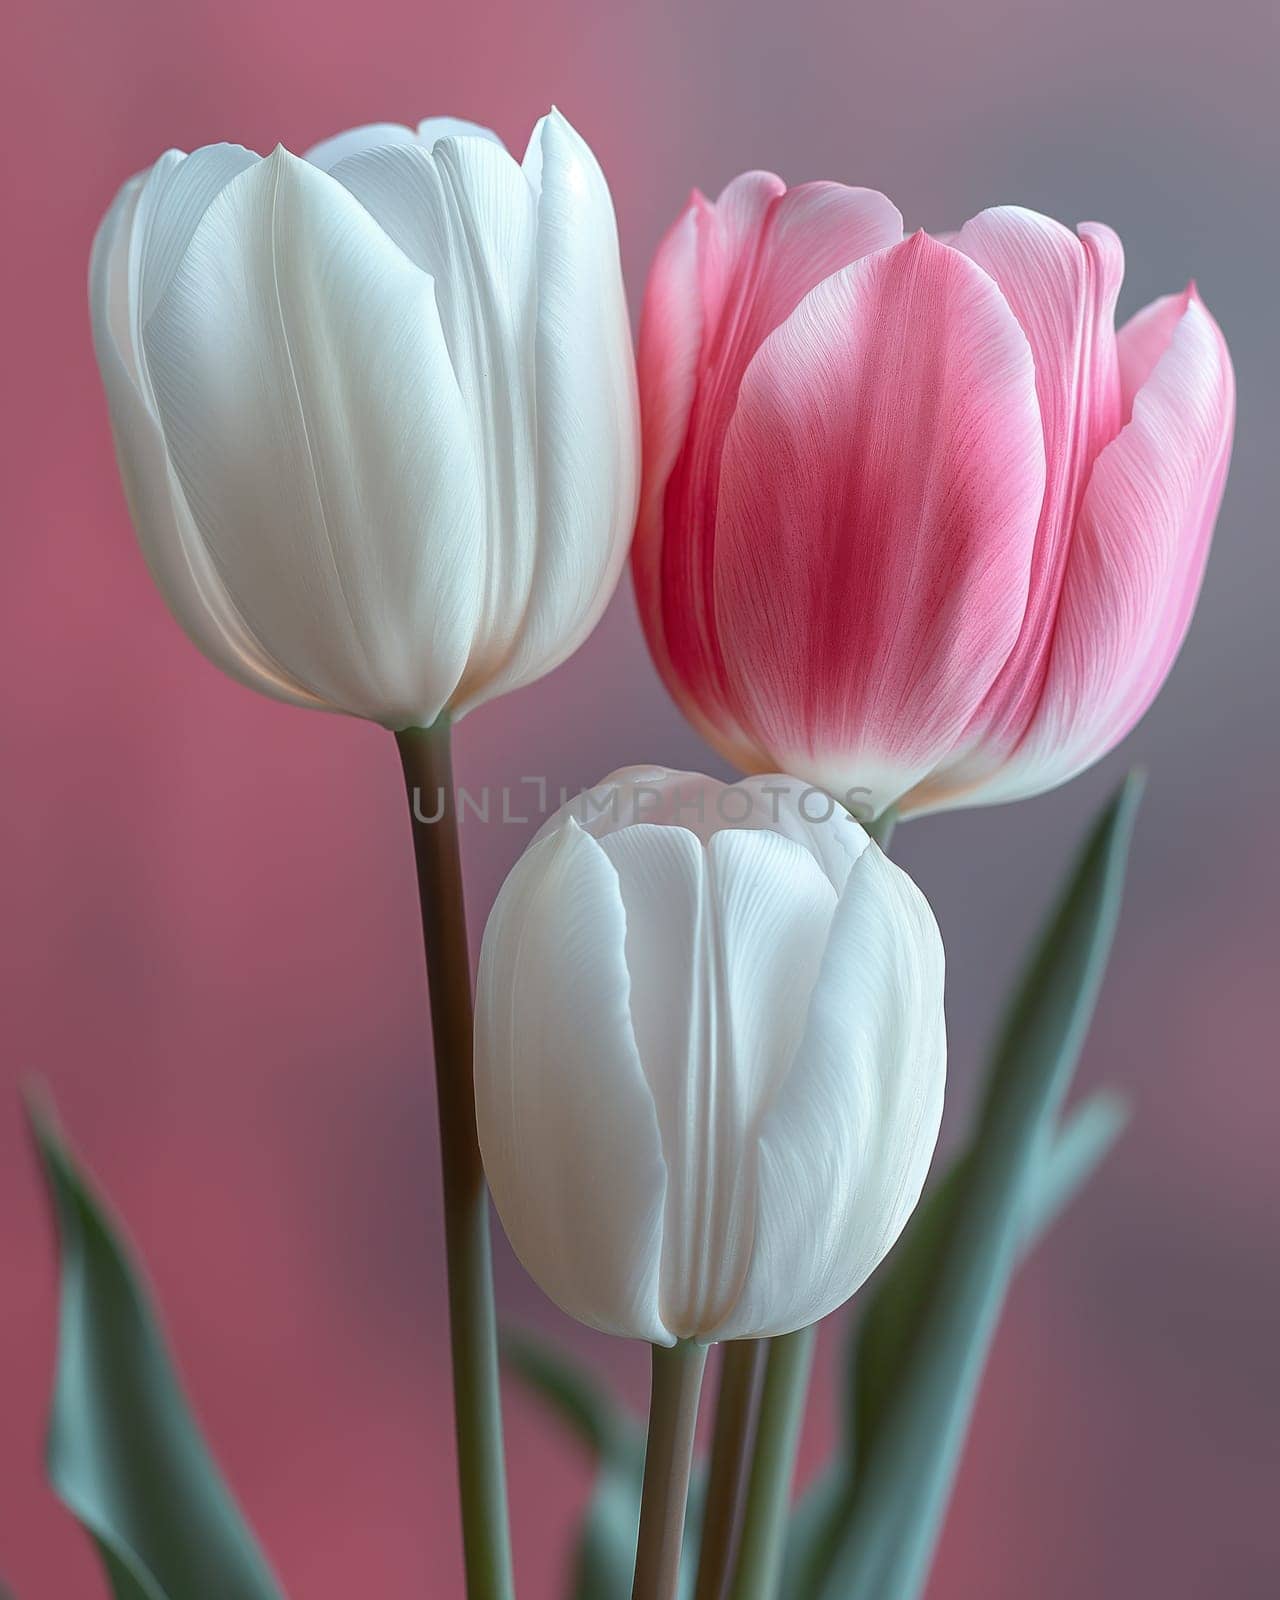 Blooming Tulips in Soft Light. Selective focus.